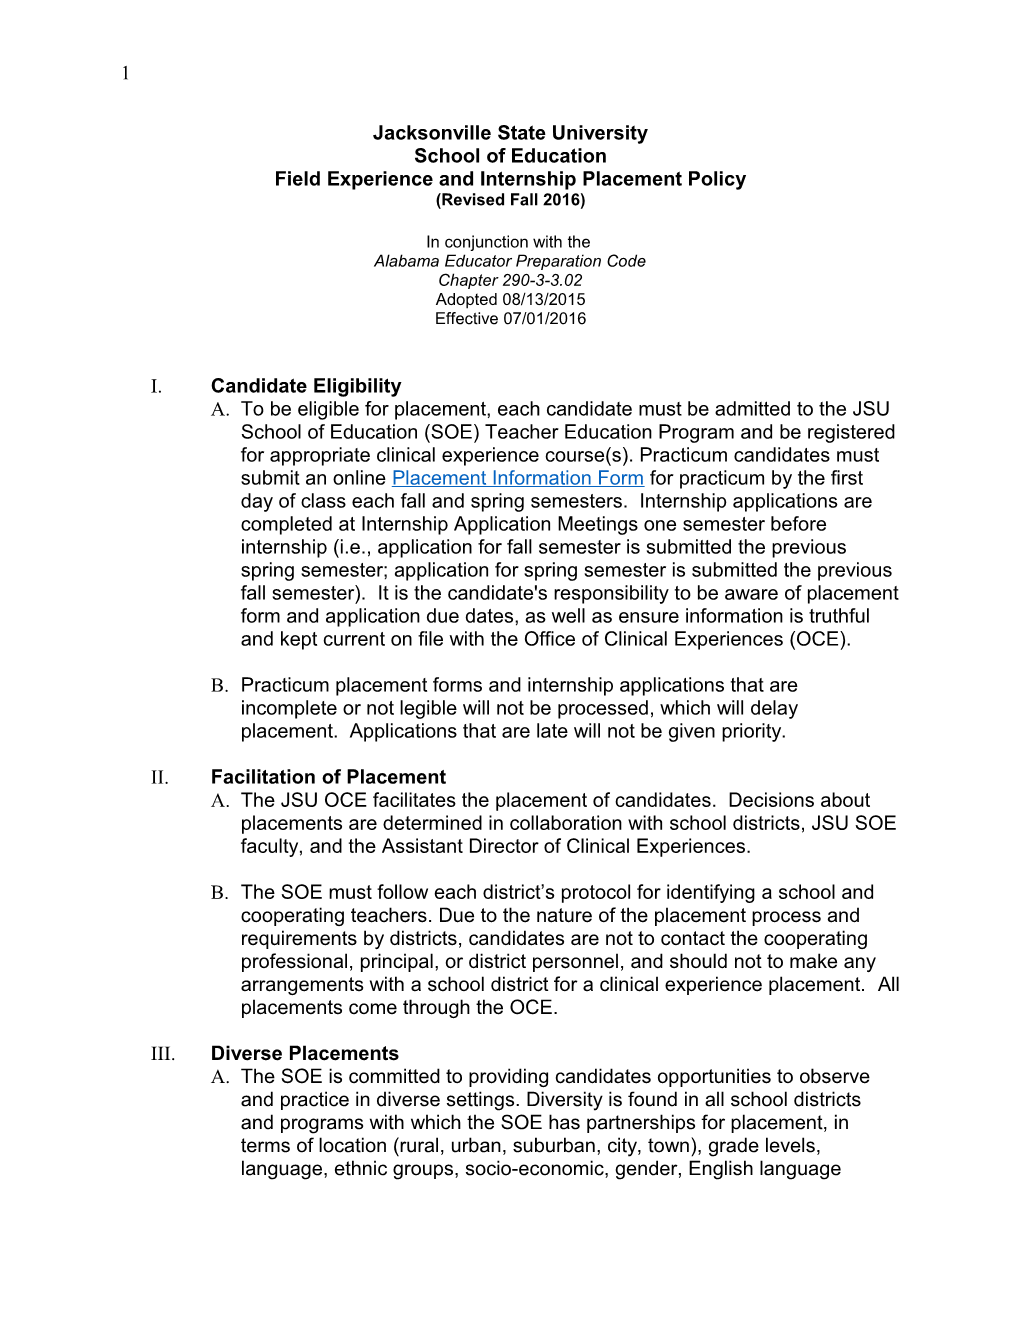 Field Experience and Internship Placement Policy